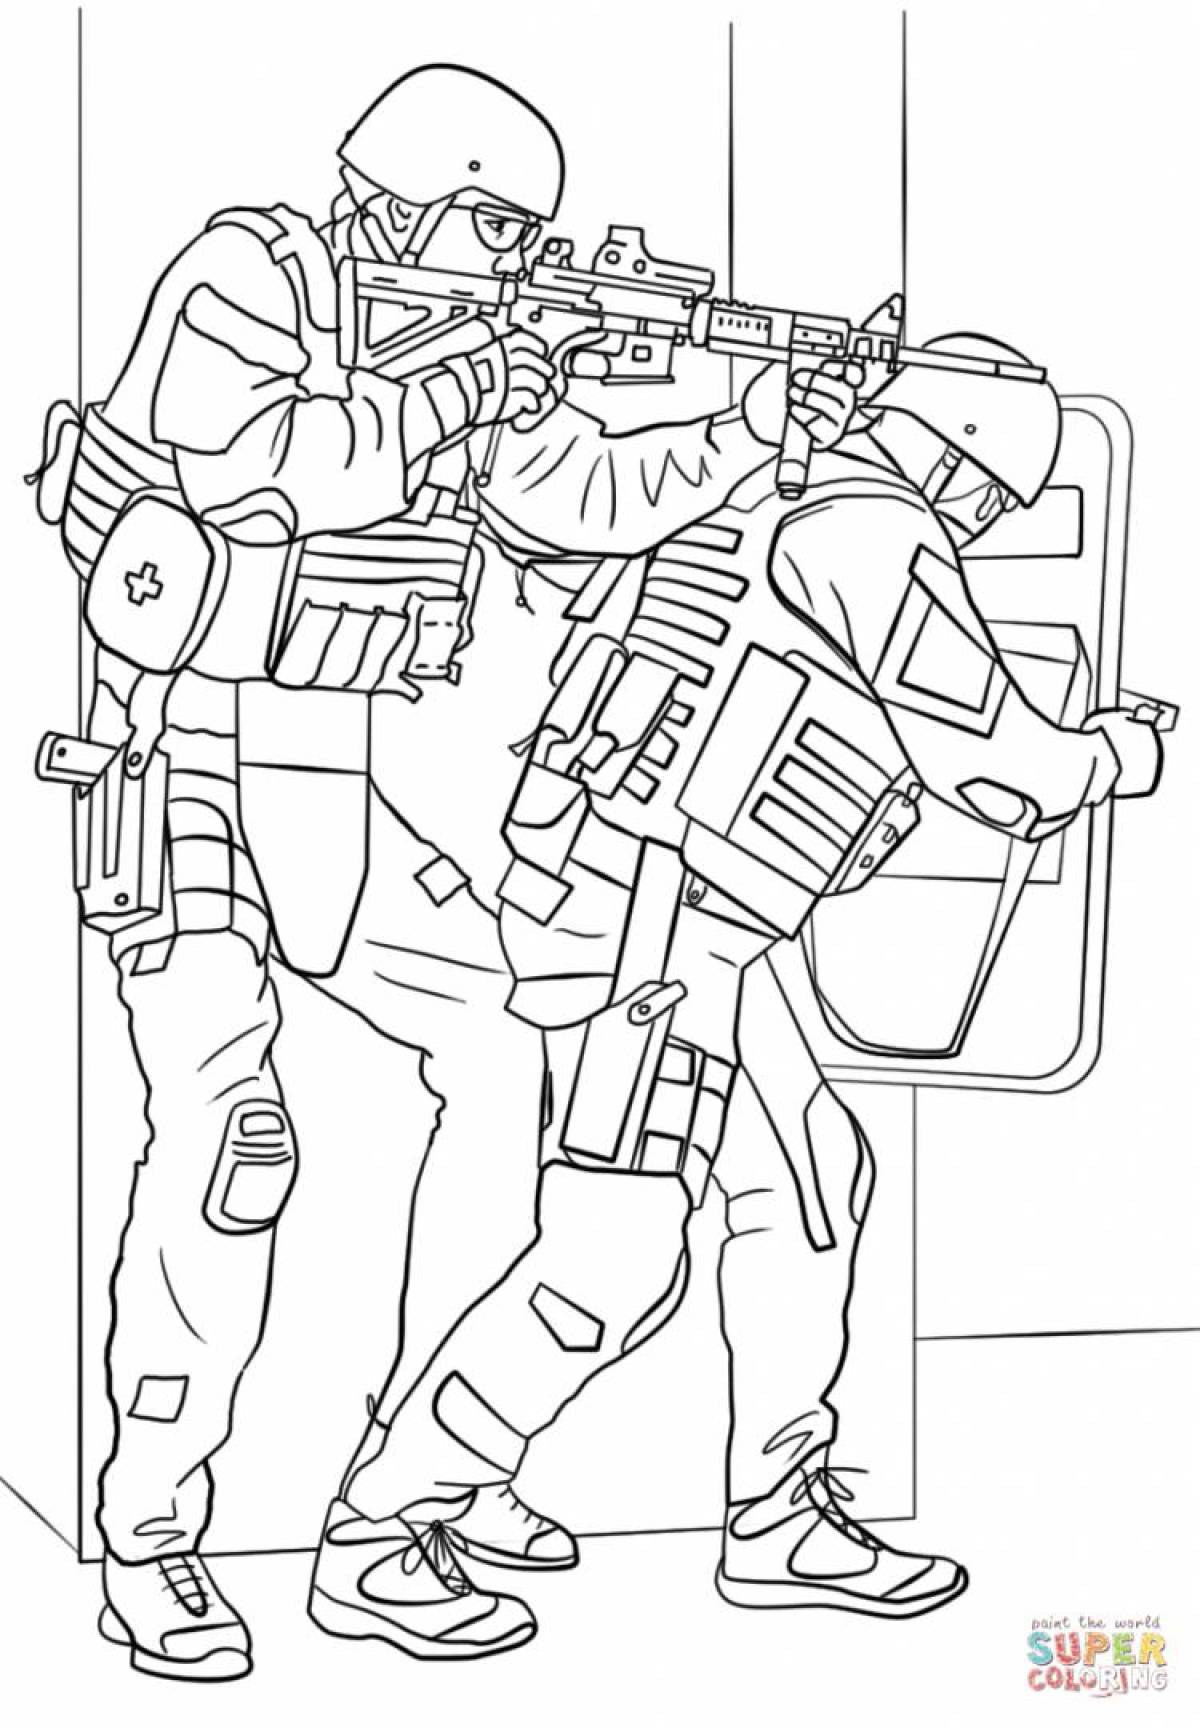 Coloring page indestructible riot police